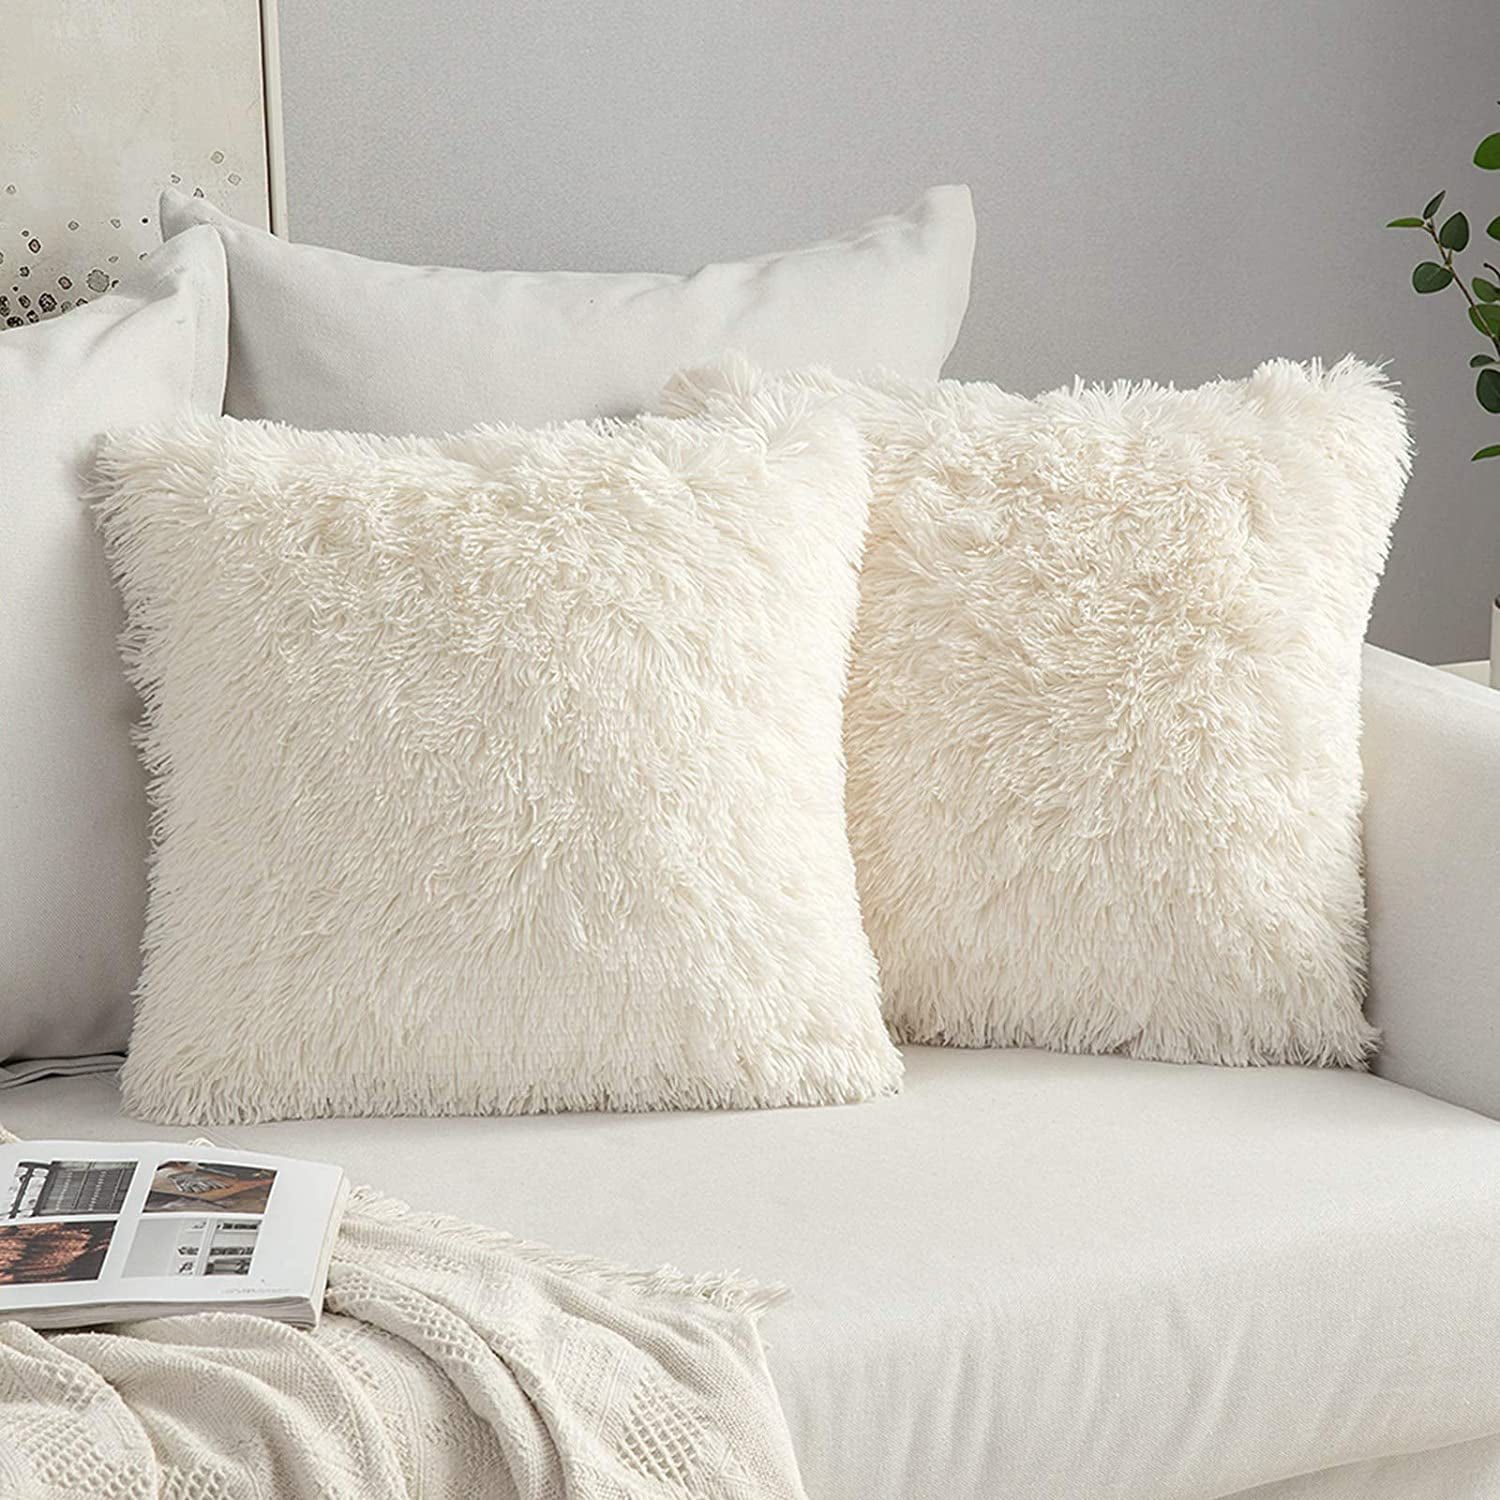 Peshtemania Golden White Fluffy Pillows (2packs 20x20) Cute Faux Fur  Pillow Case Decorative for Couch Sofa Fuzzy Throw Pillows Covers for  Bedroom